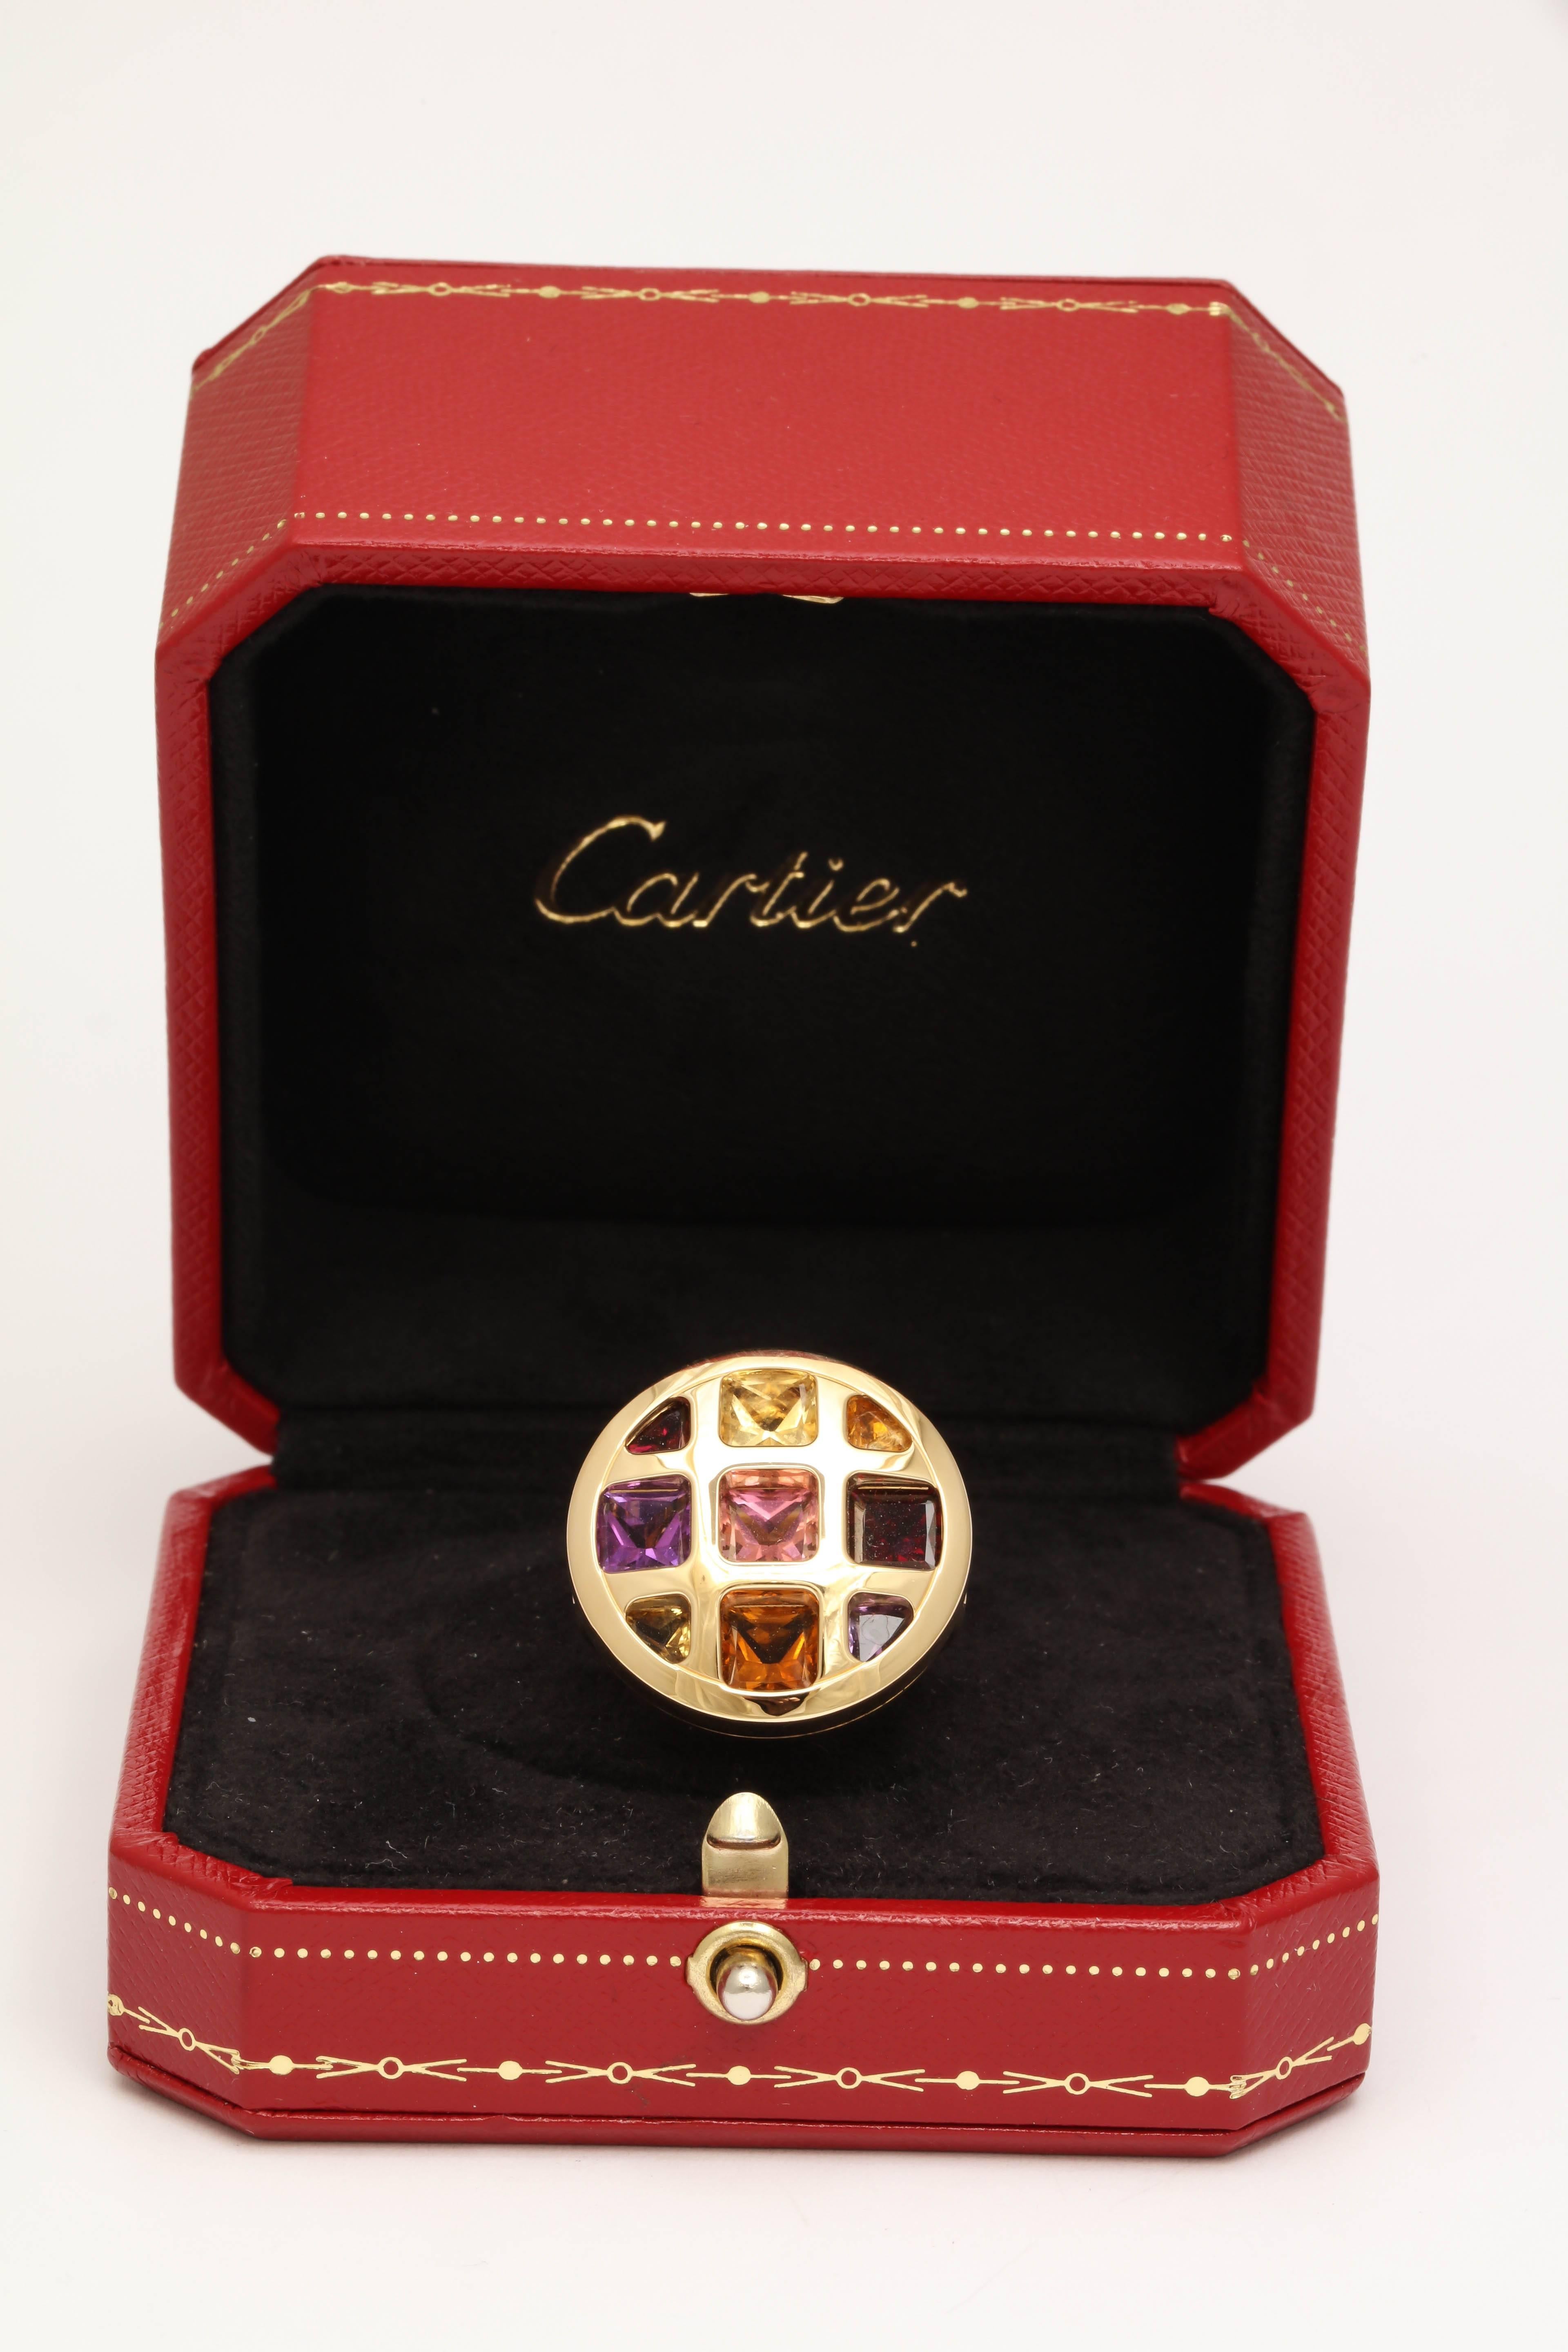 18kt Yellow Gold Circular Waffle And Tic-Tac-Toe Design Ring Embellished With French Cut Citrine,Garnet,Pink Tourmaline And Amethyst Stones.Made In Paris By Cartier In The 1990's.Serial # NM 0232. Size 52, American Size 6.Comes With Original